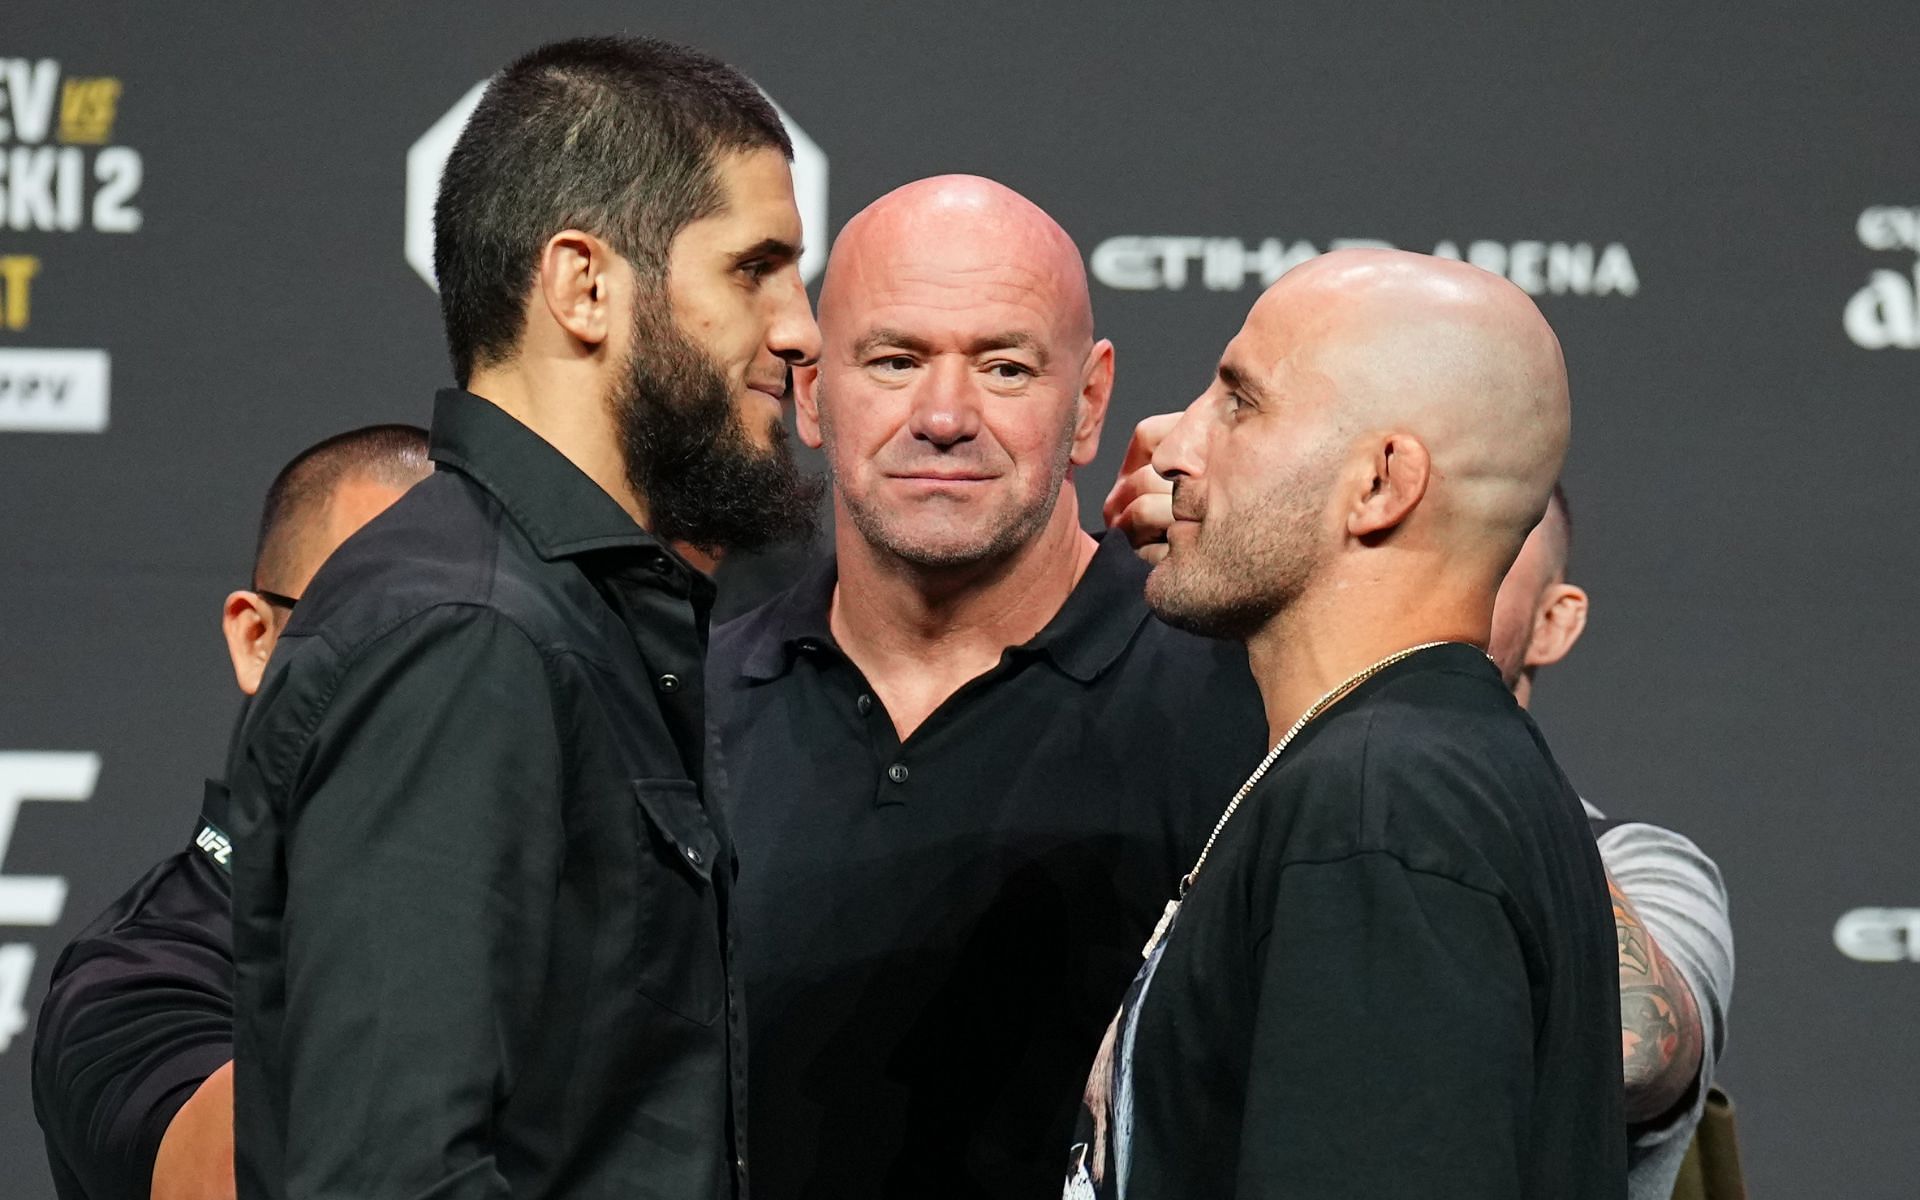 When will Islam Makhachev and Alexander Volkanovski weigh in for their big fight this weekend? [Image Credit: @ufc on Twitter]